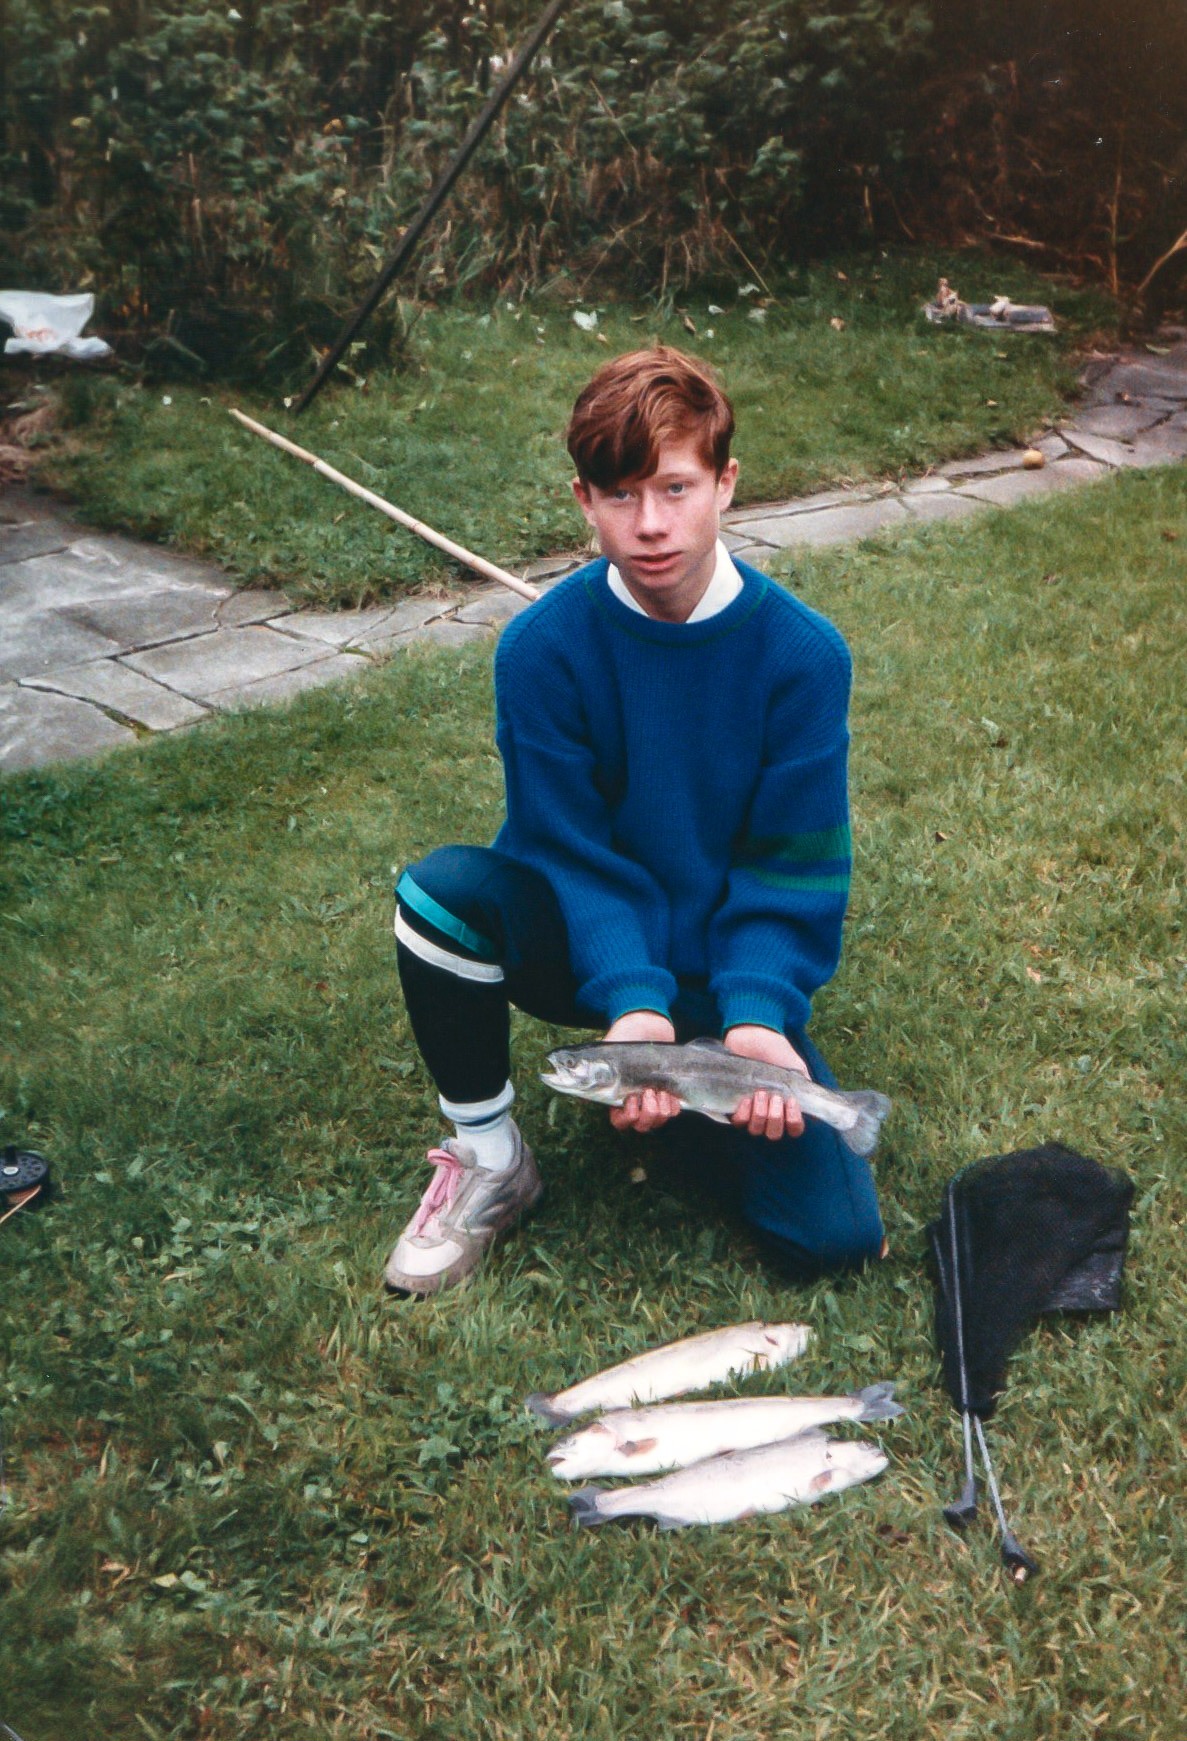 Paul Gaskell at 14 with a bag limit from stocked trout fishing day trip